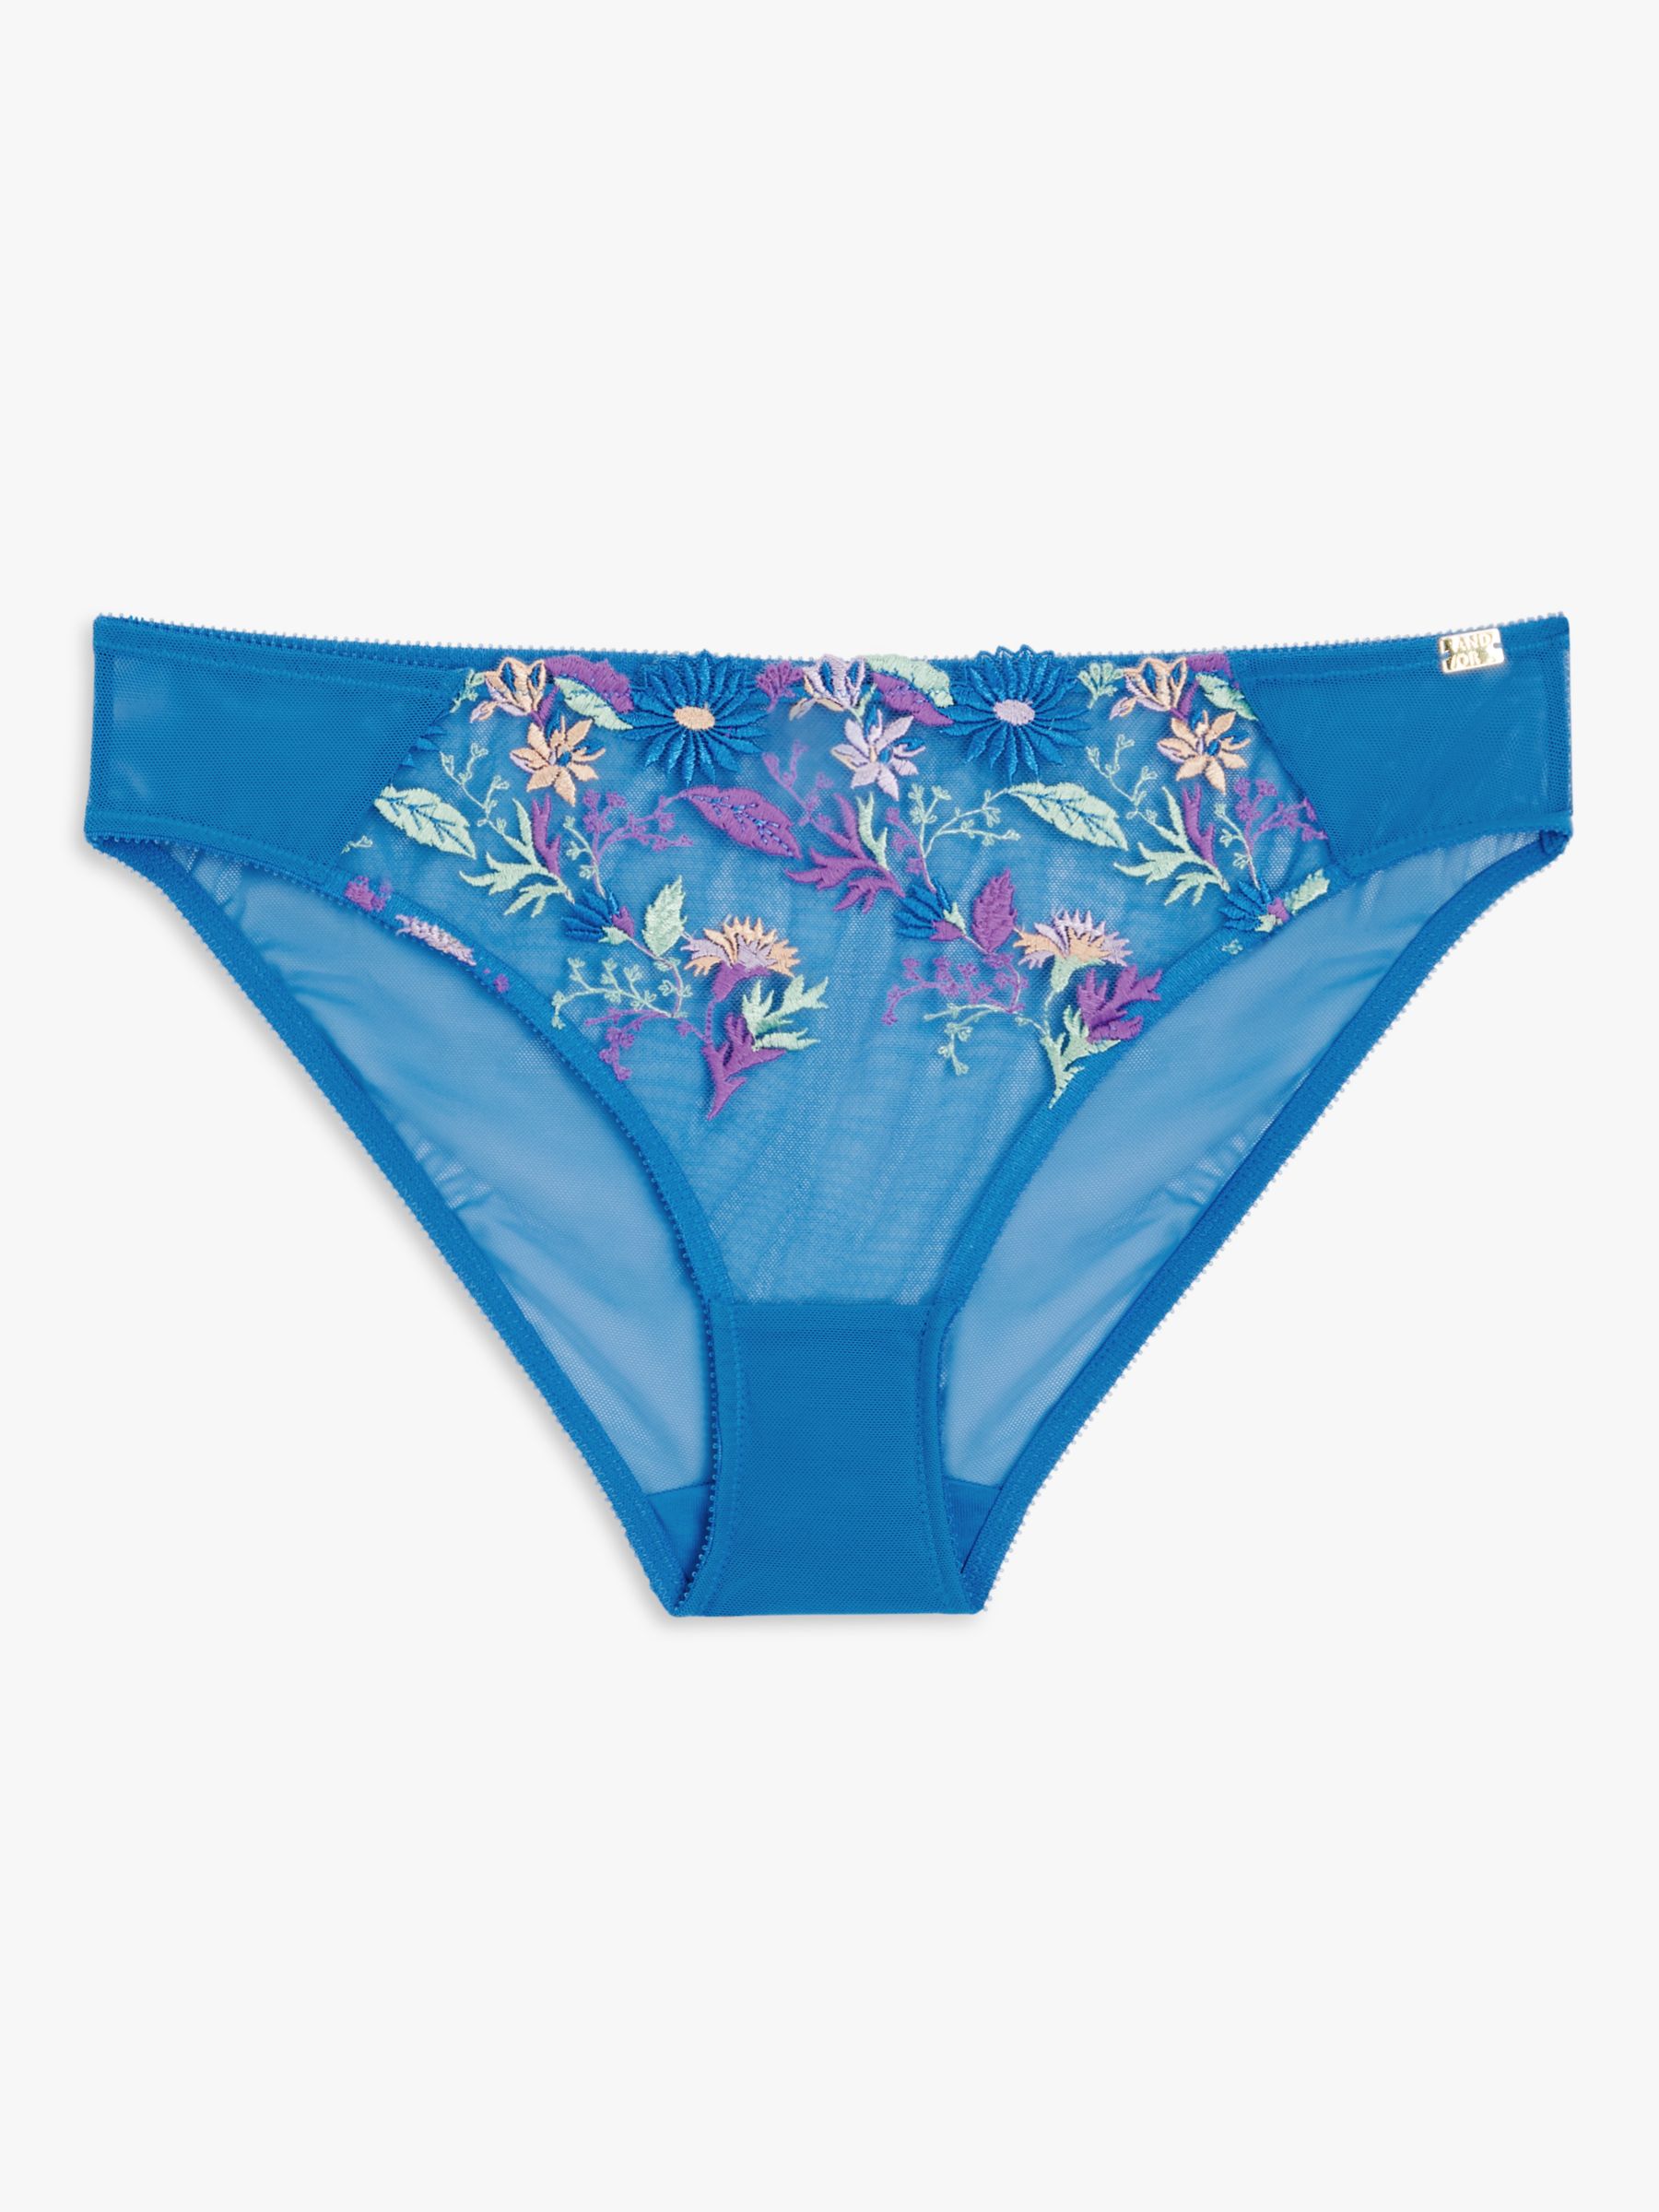 AND/OR Kiki Floral Knickers, Blue/Multi at John Lewis & Partners